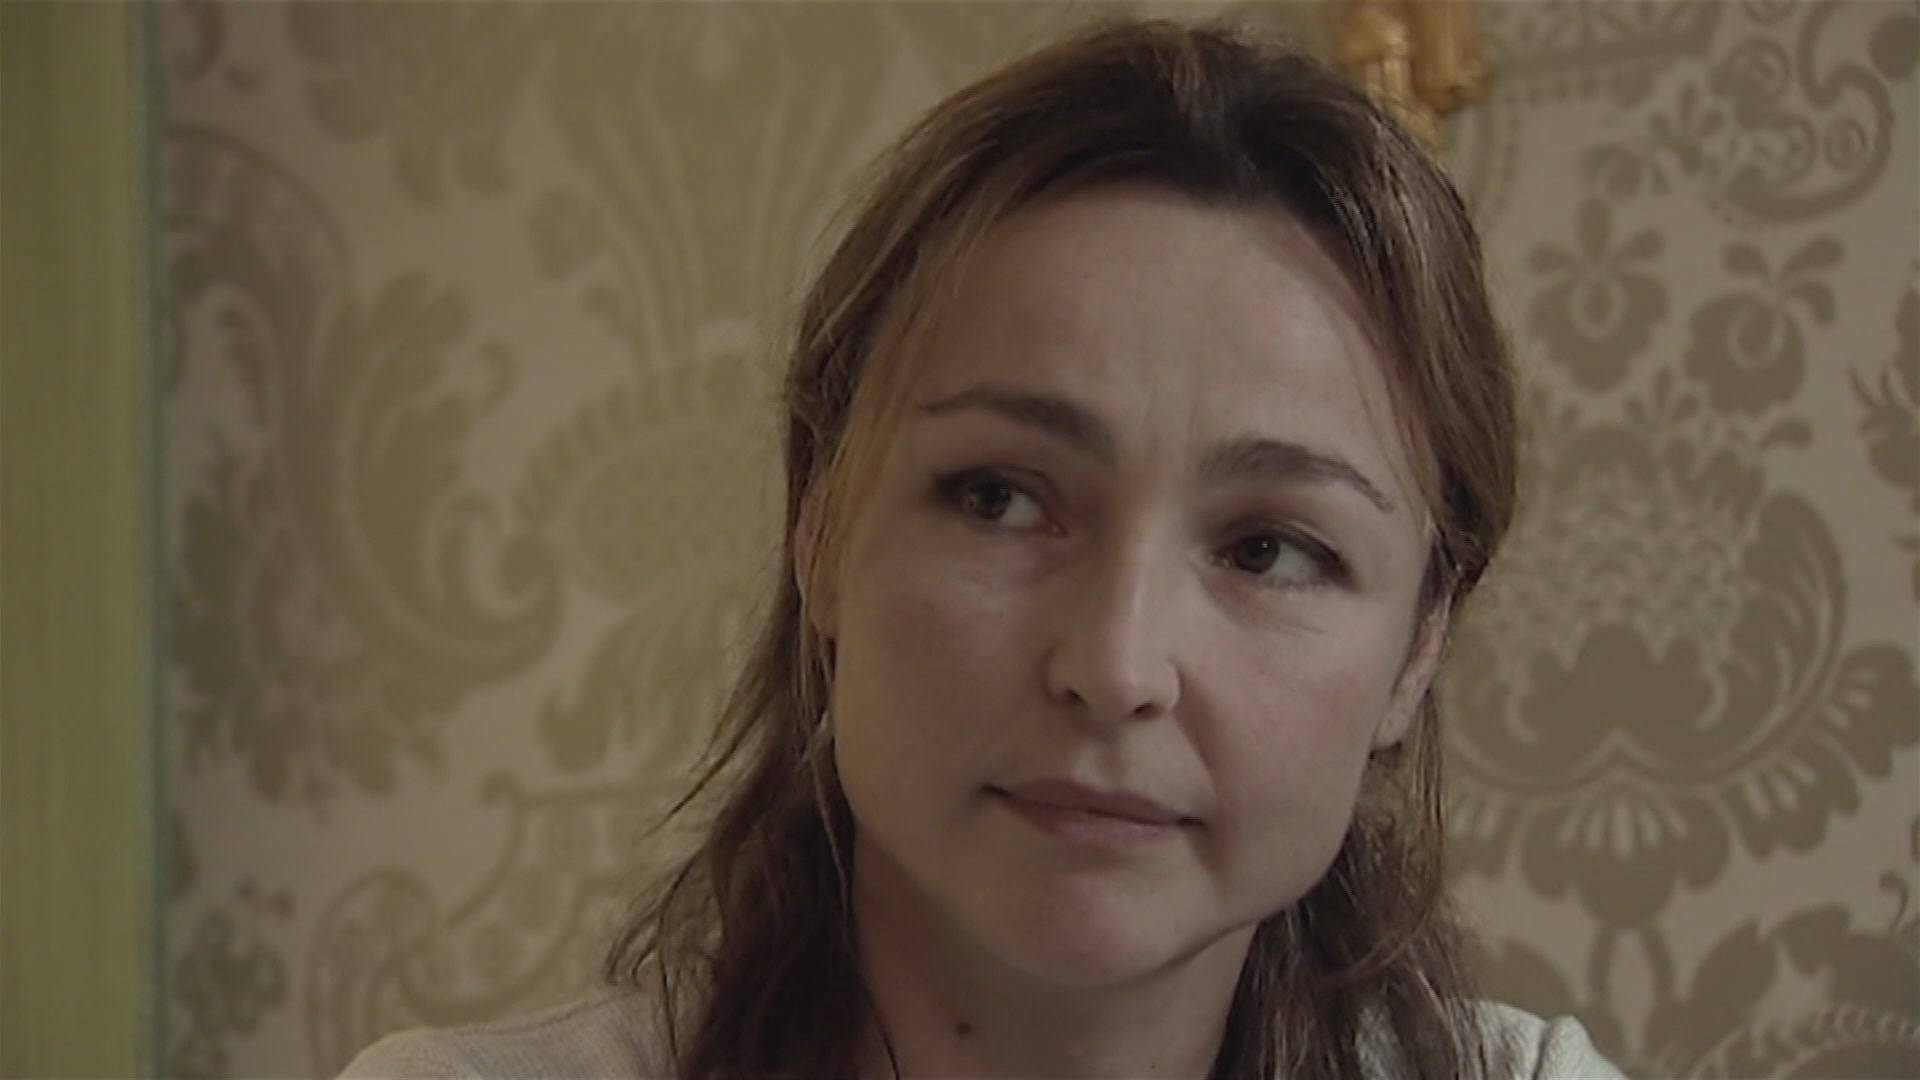 Catherine Frot 